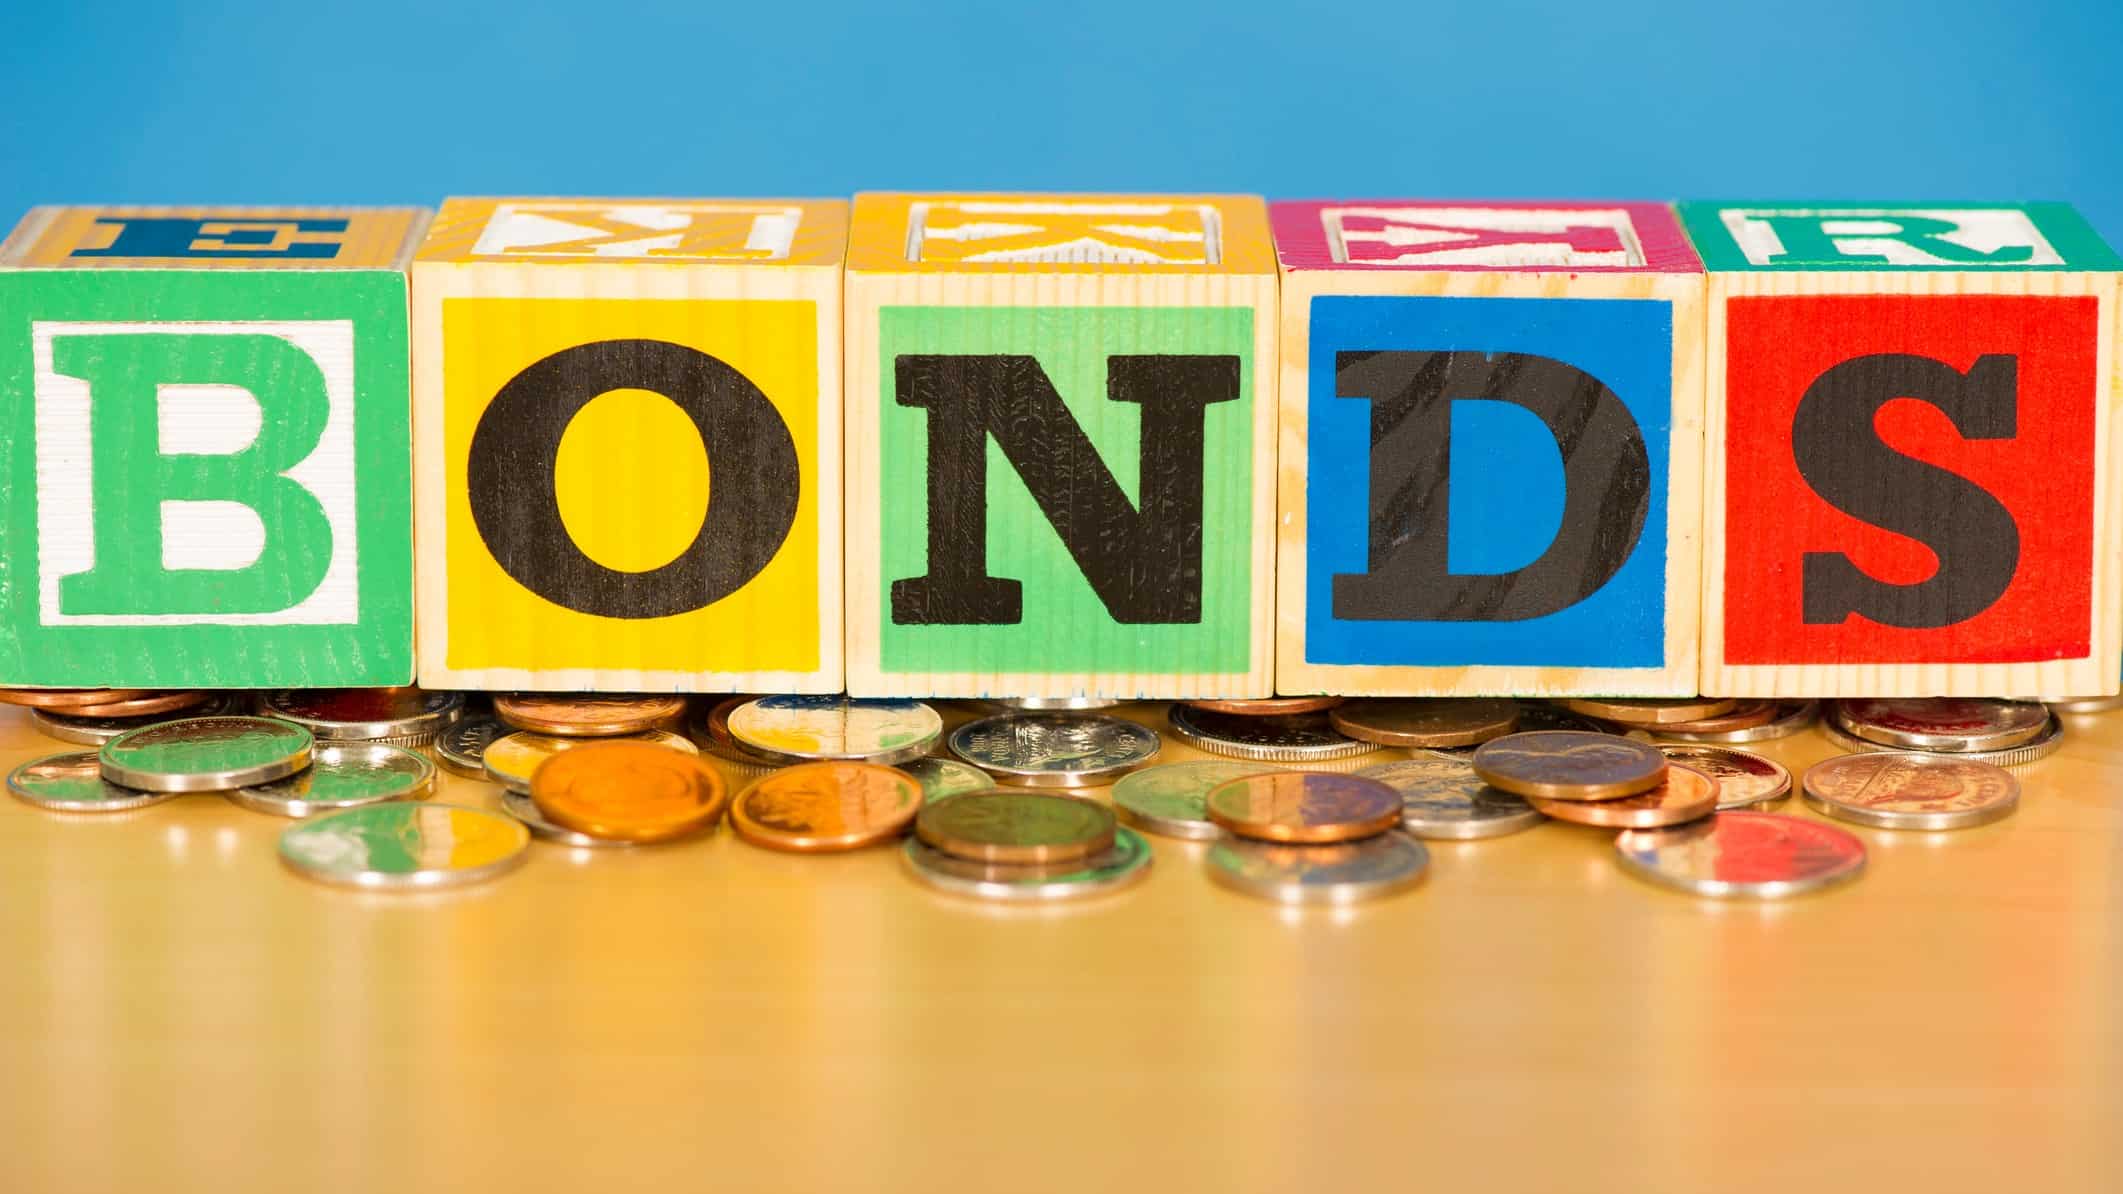 bond yields represented by wooden blocks spelling bonds atop coins